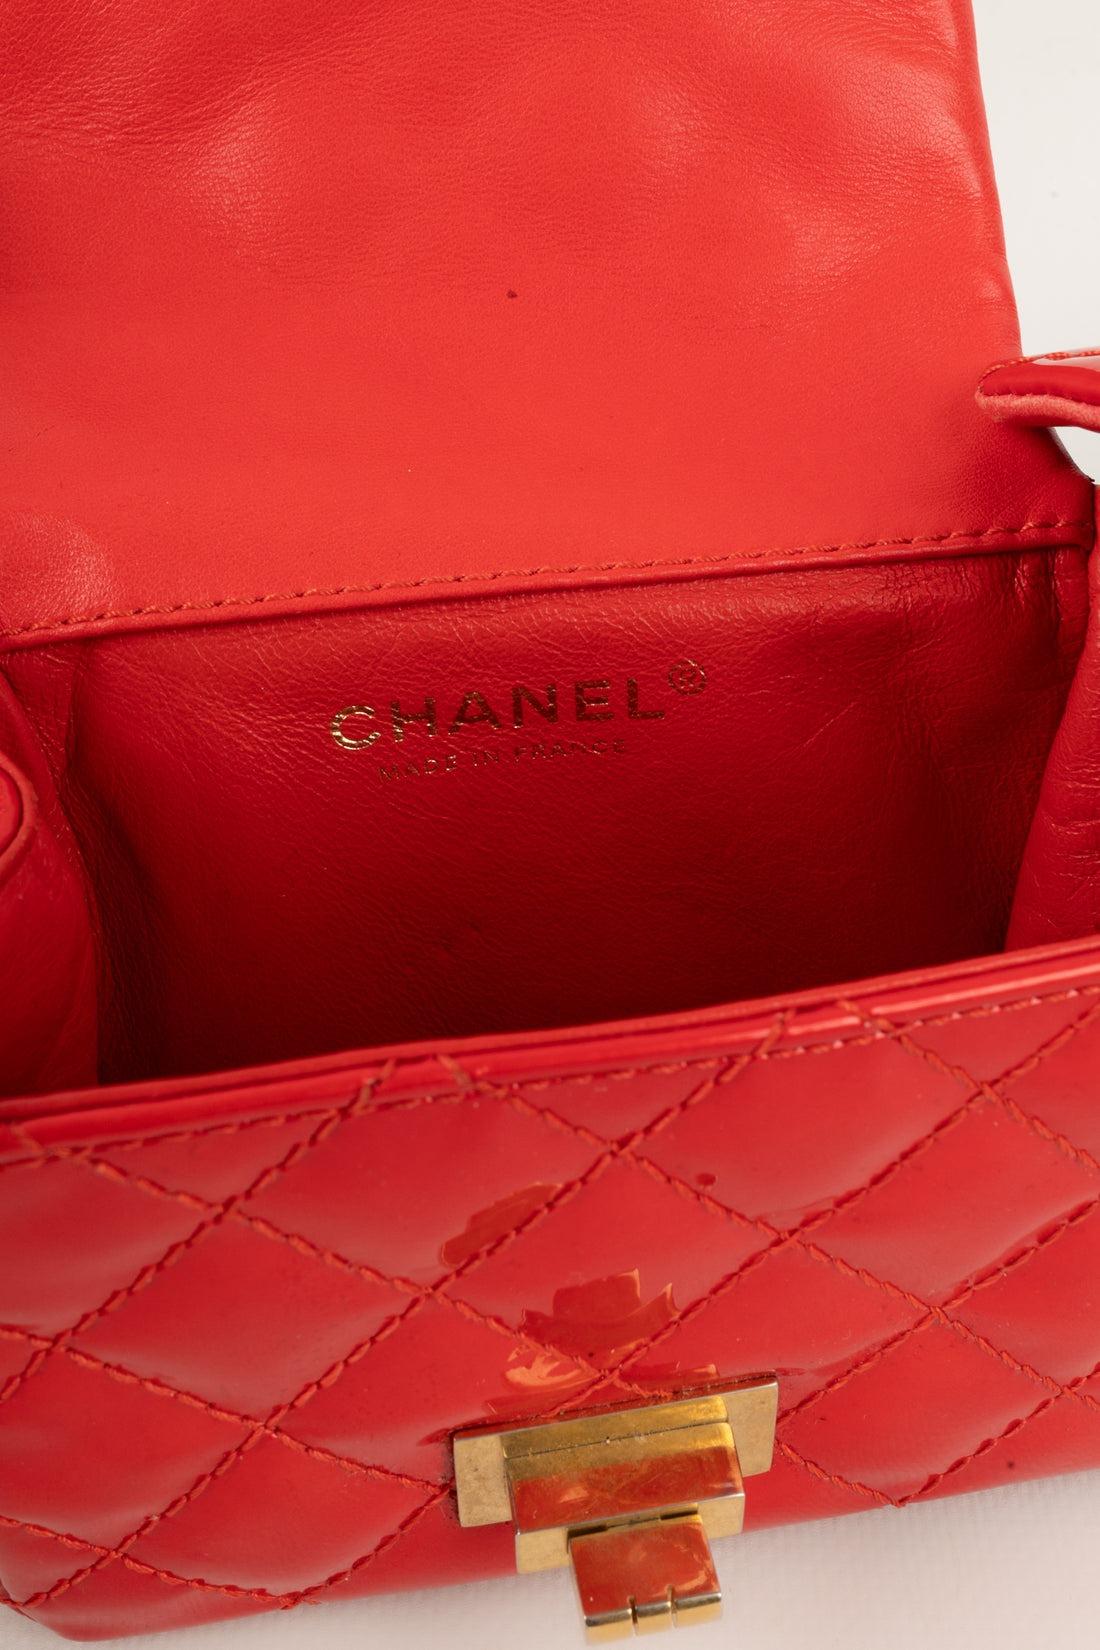 Chanel Baguette Bag with Double Pocket In Red Patent Leather, 2008/2009 For Sale 8